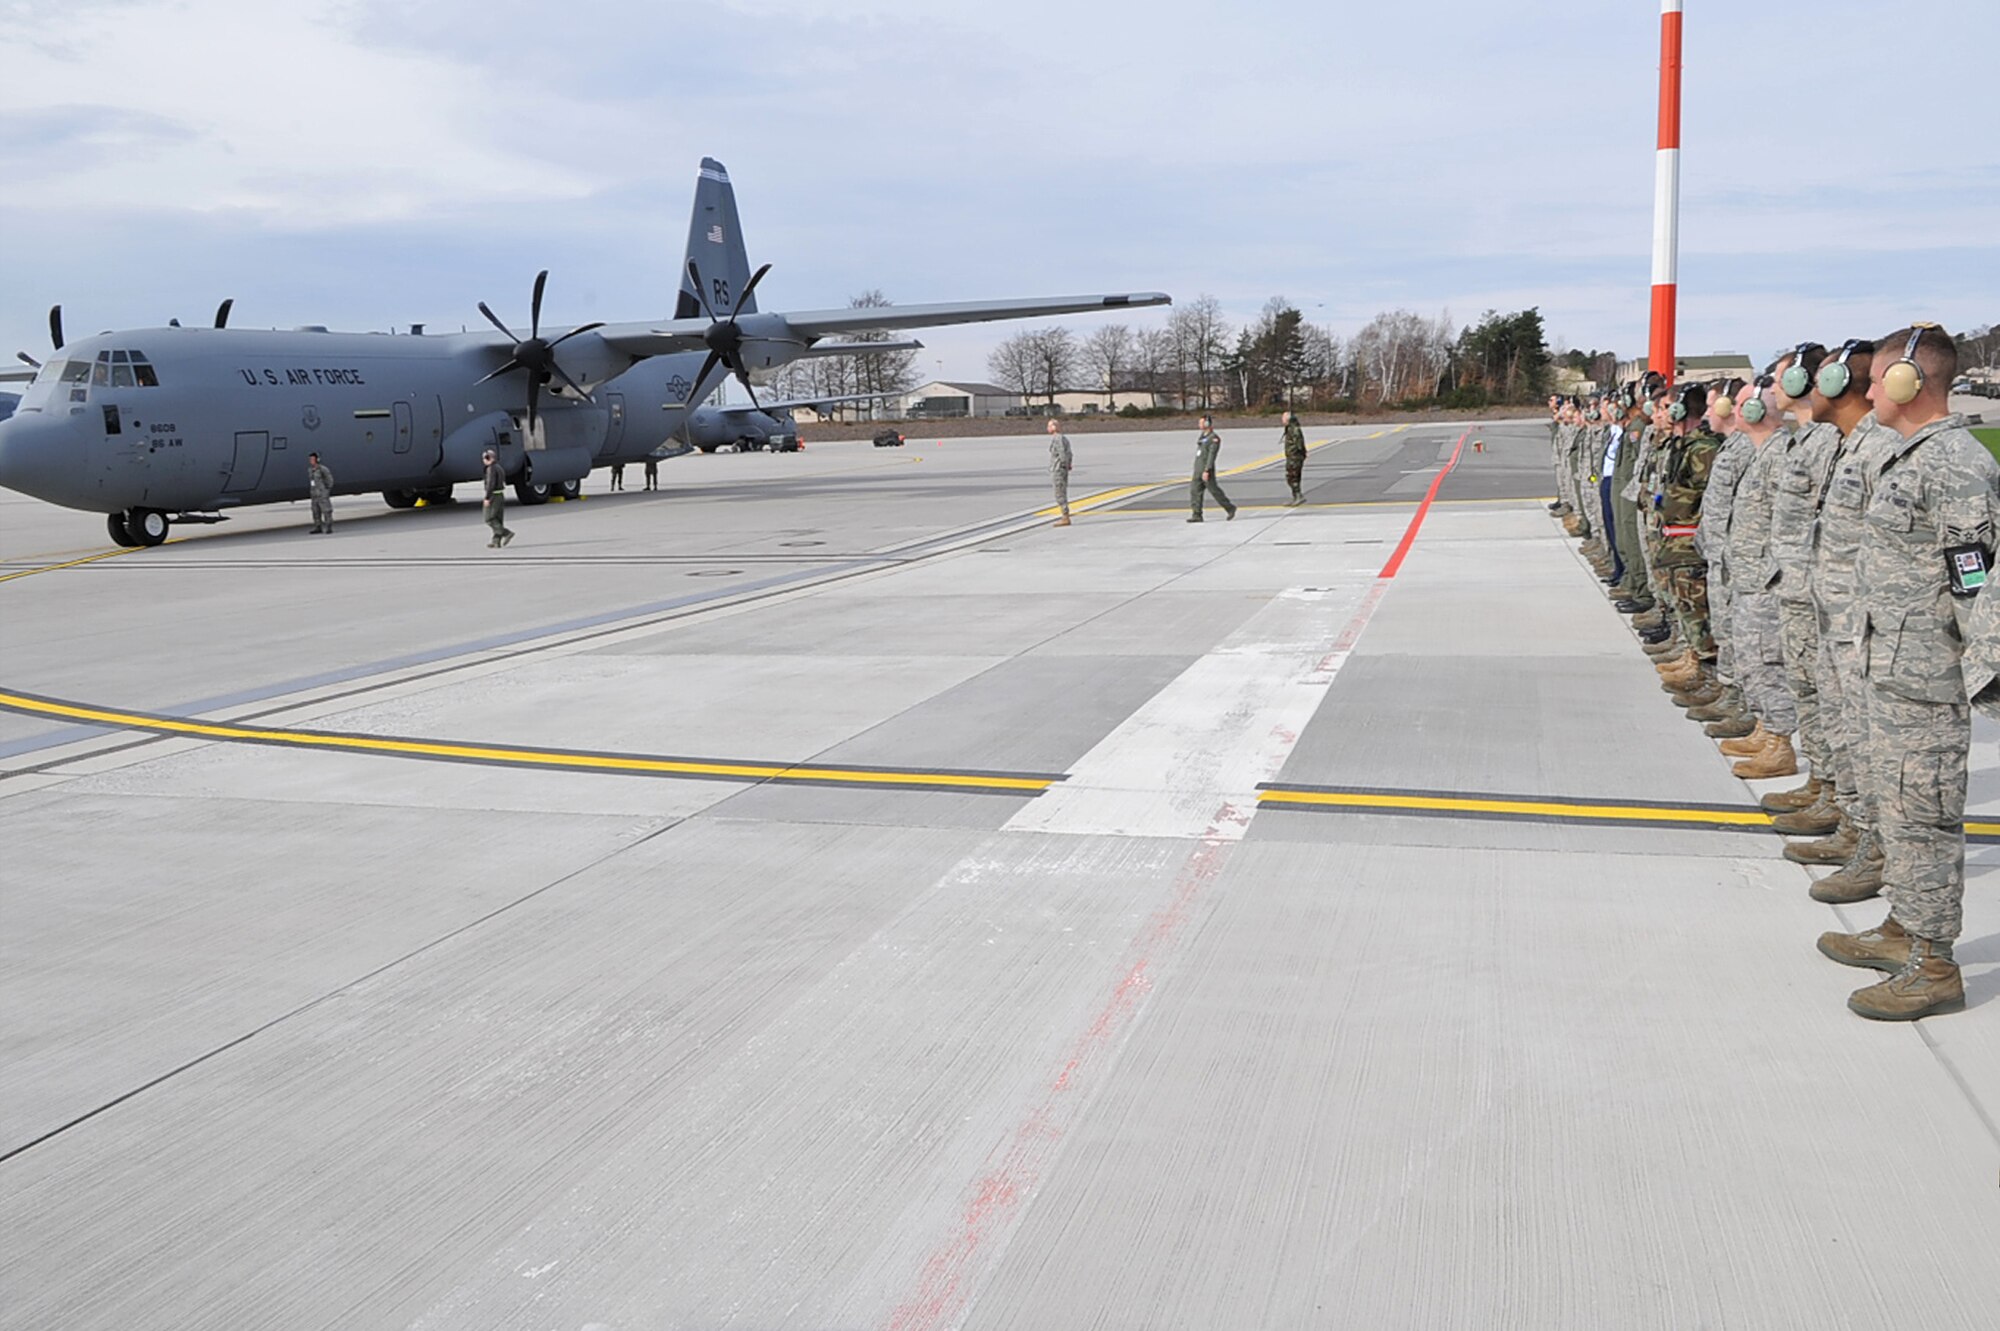 The 13th C-130J Super Hercules is delivered by Maj. Gen. Jack Egginton, Director, Air and Space Operations, Headquarters U.S. Air Forces in Europe as Airmen from the 86th Aircraft Maintenance Squadron and 37th Airlift Squadron form a receiving line, Ramstein Air Base, Germany, March 30, 2010. Fourteen C-130J models will be assigned to Ramstein, replacing the older C-130Es as a part of the Air Force’s priority to revitalize the aircraft fleet. (U.S. Air Force photo by Senior Airman Tony R. Ritter)